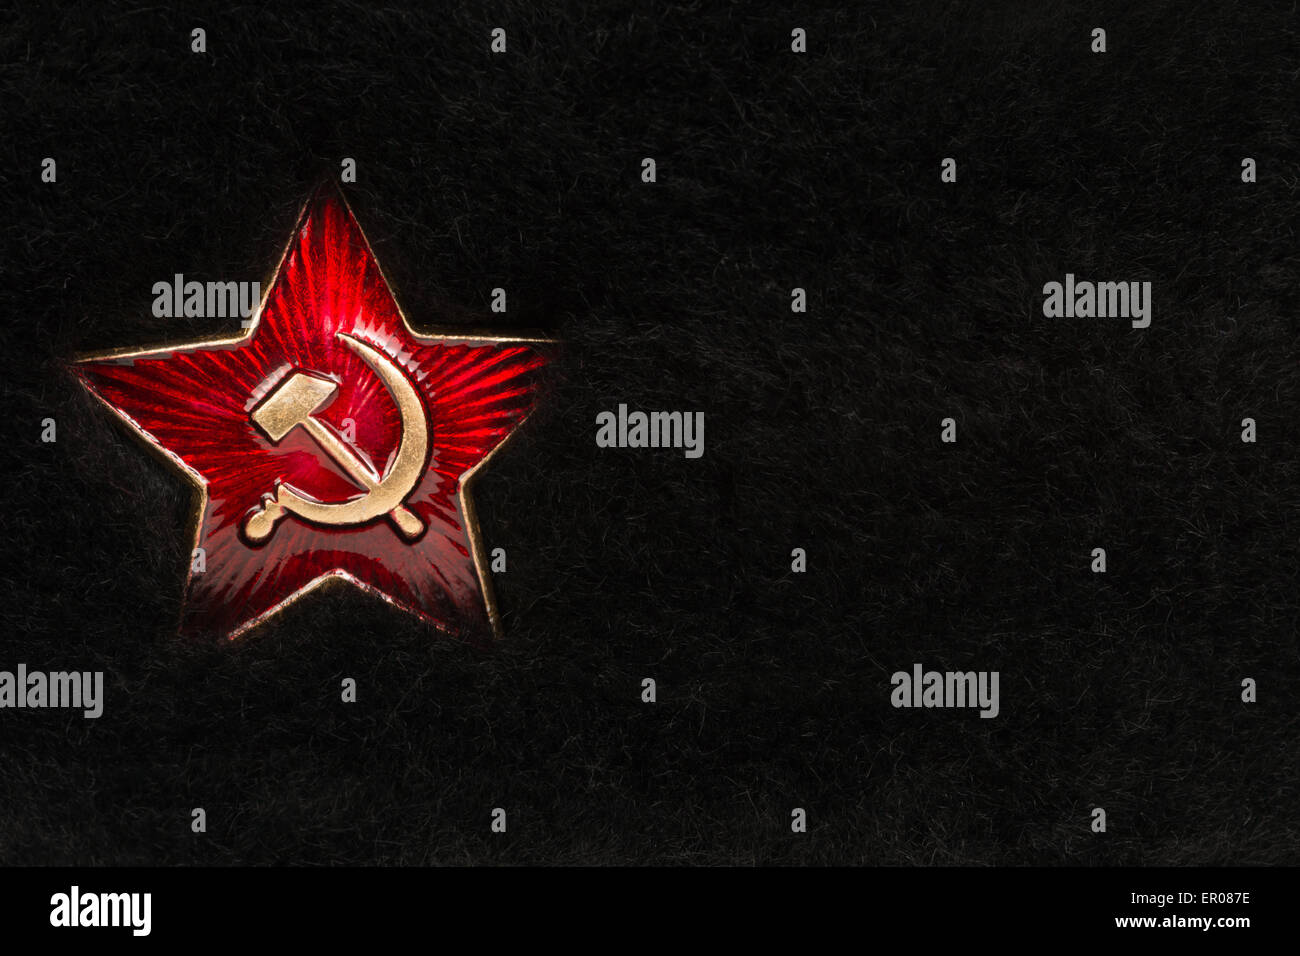 Russian Red Star with Hammer and Sickle on Fur Stock Photo